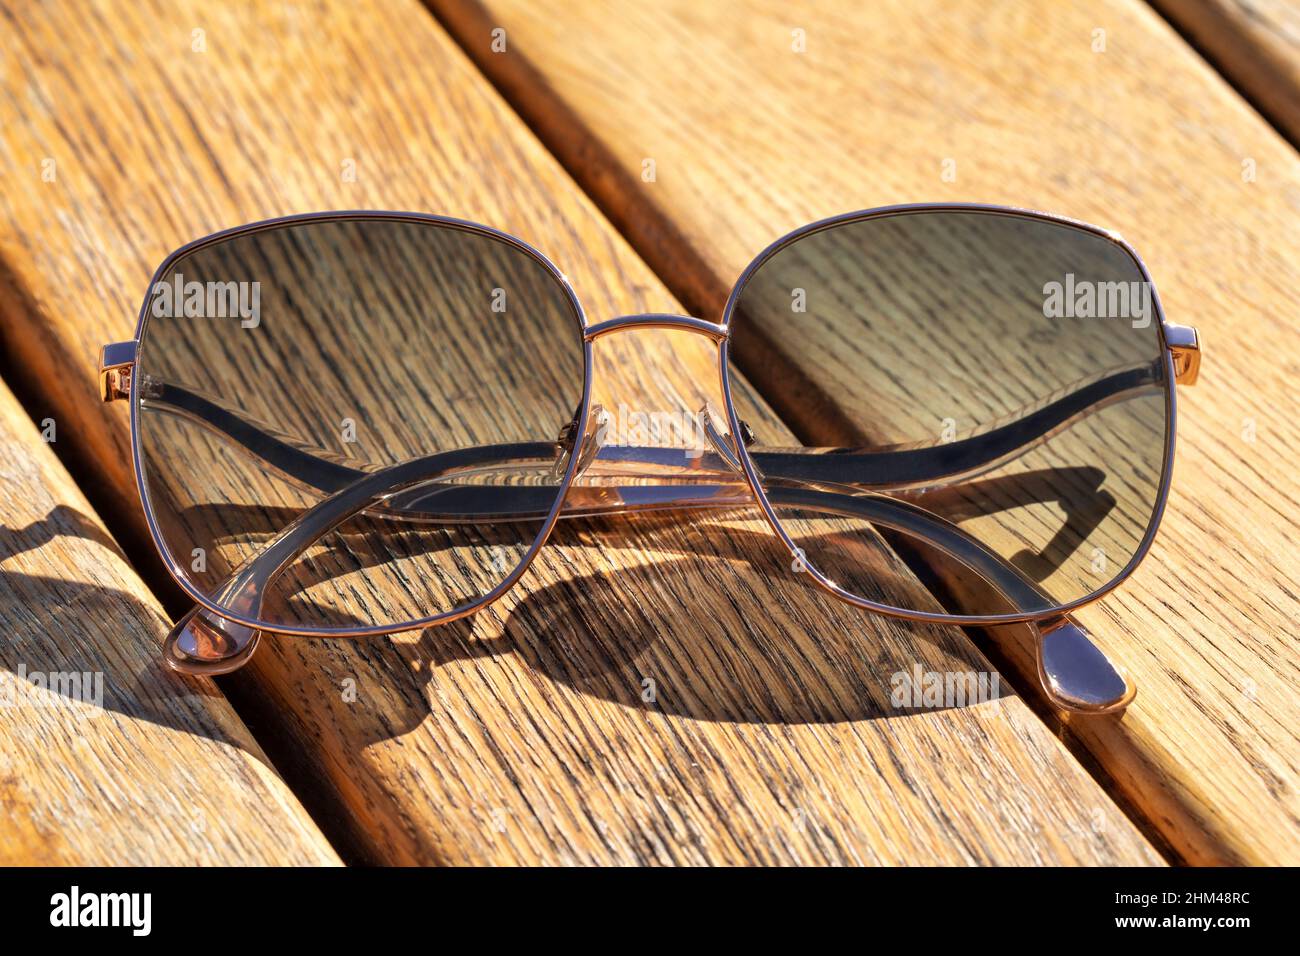 Metal thin trendy sunglasses dark tint, on wooden table. Sunny day, outdoors, bright light and shadow. Closeup image, minimal style. Stock Photo